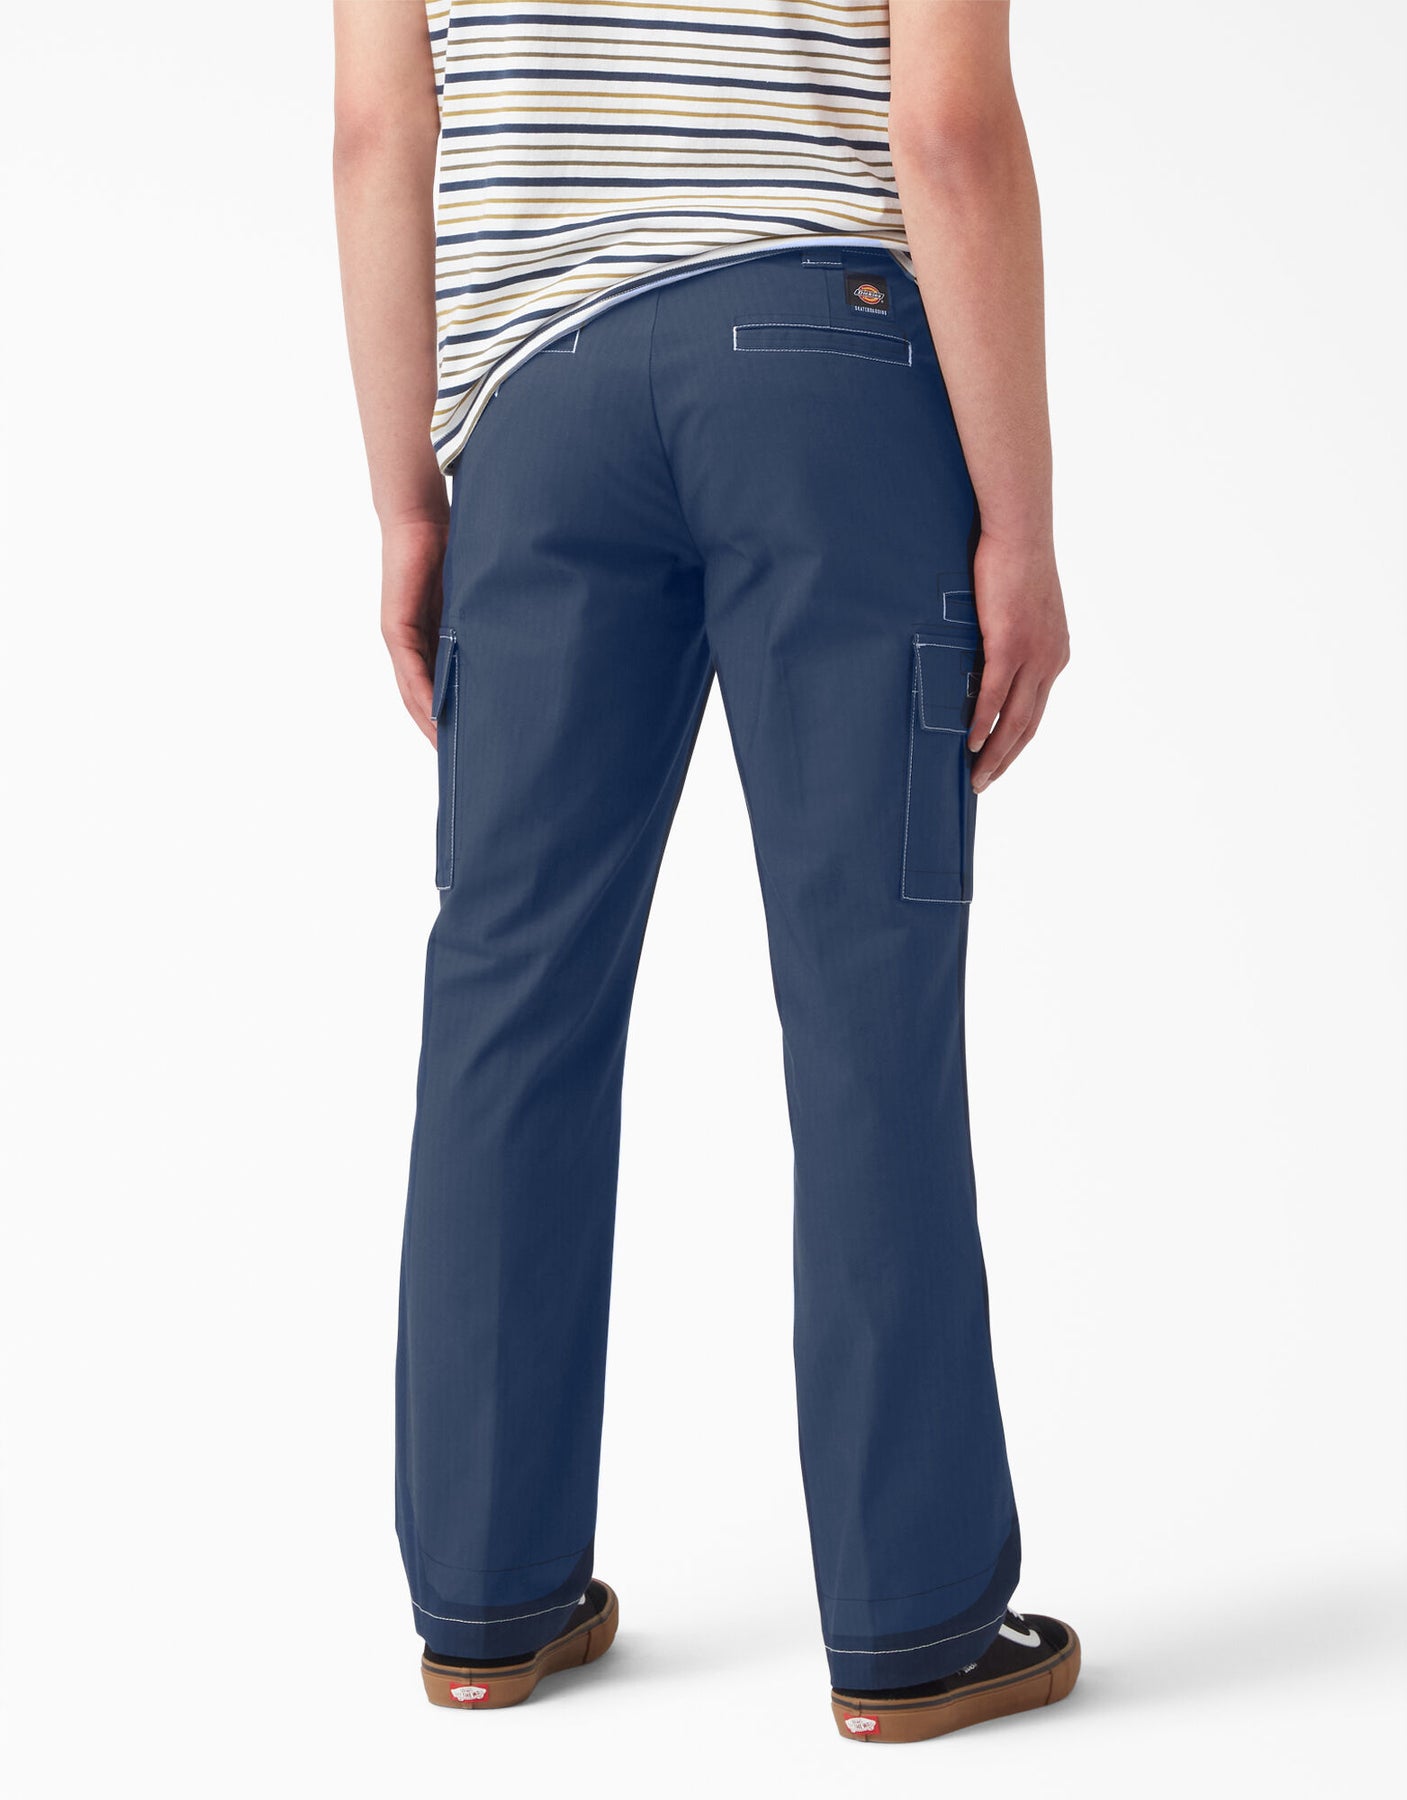 TOPSTITCHED CARGO PANTS - Ink blue